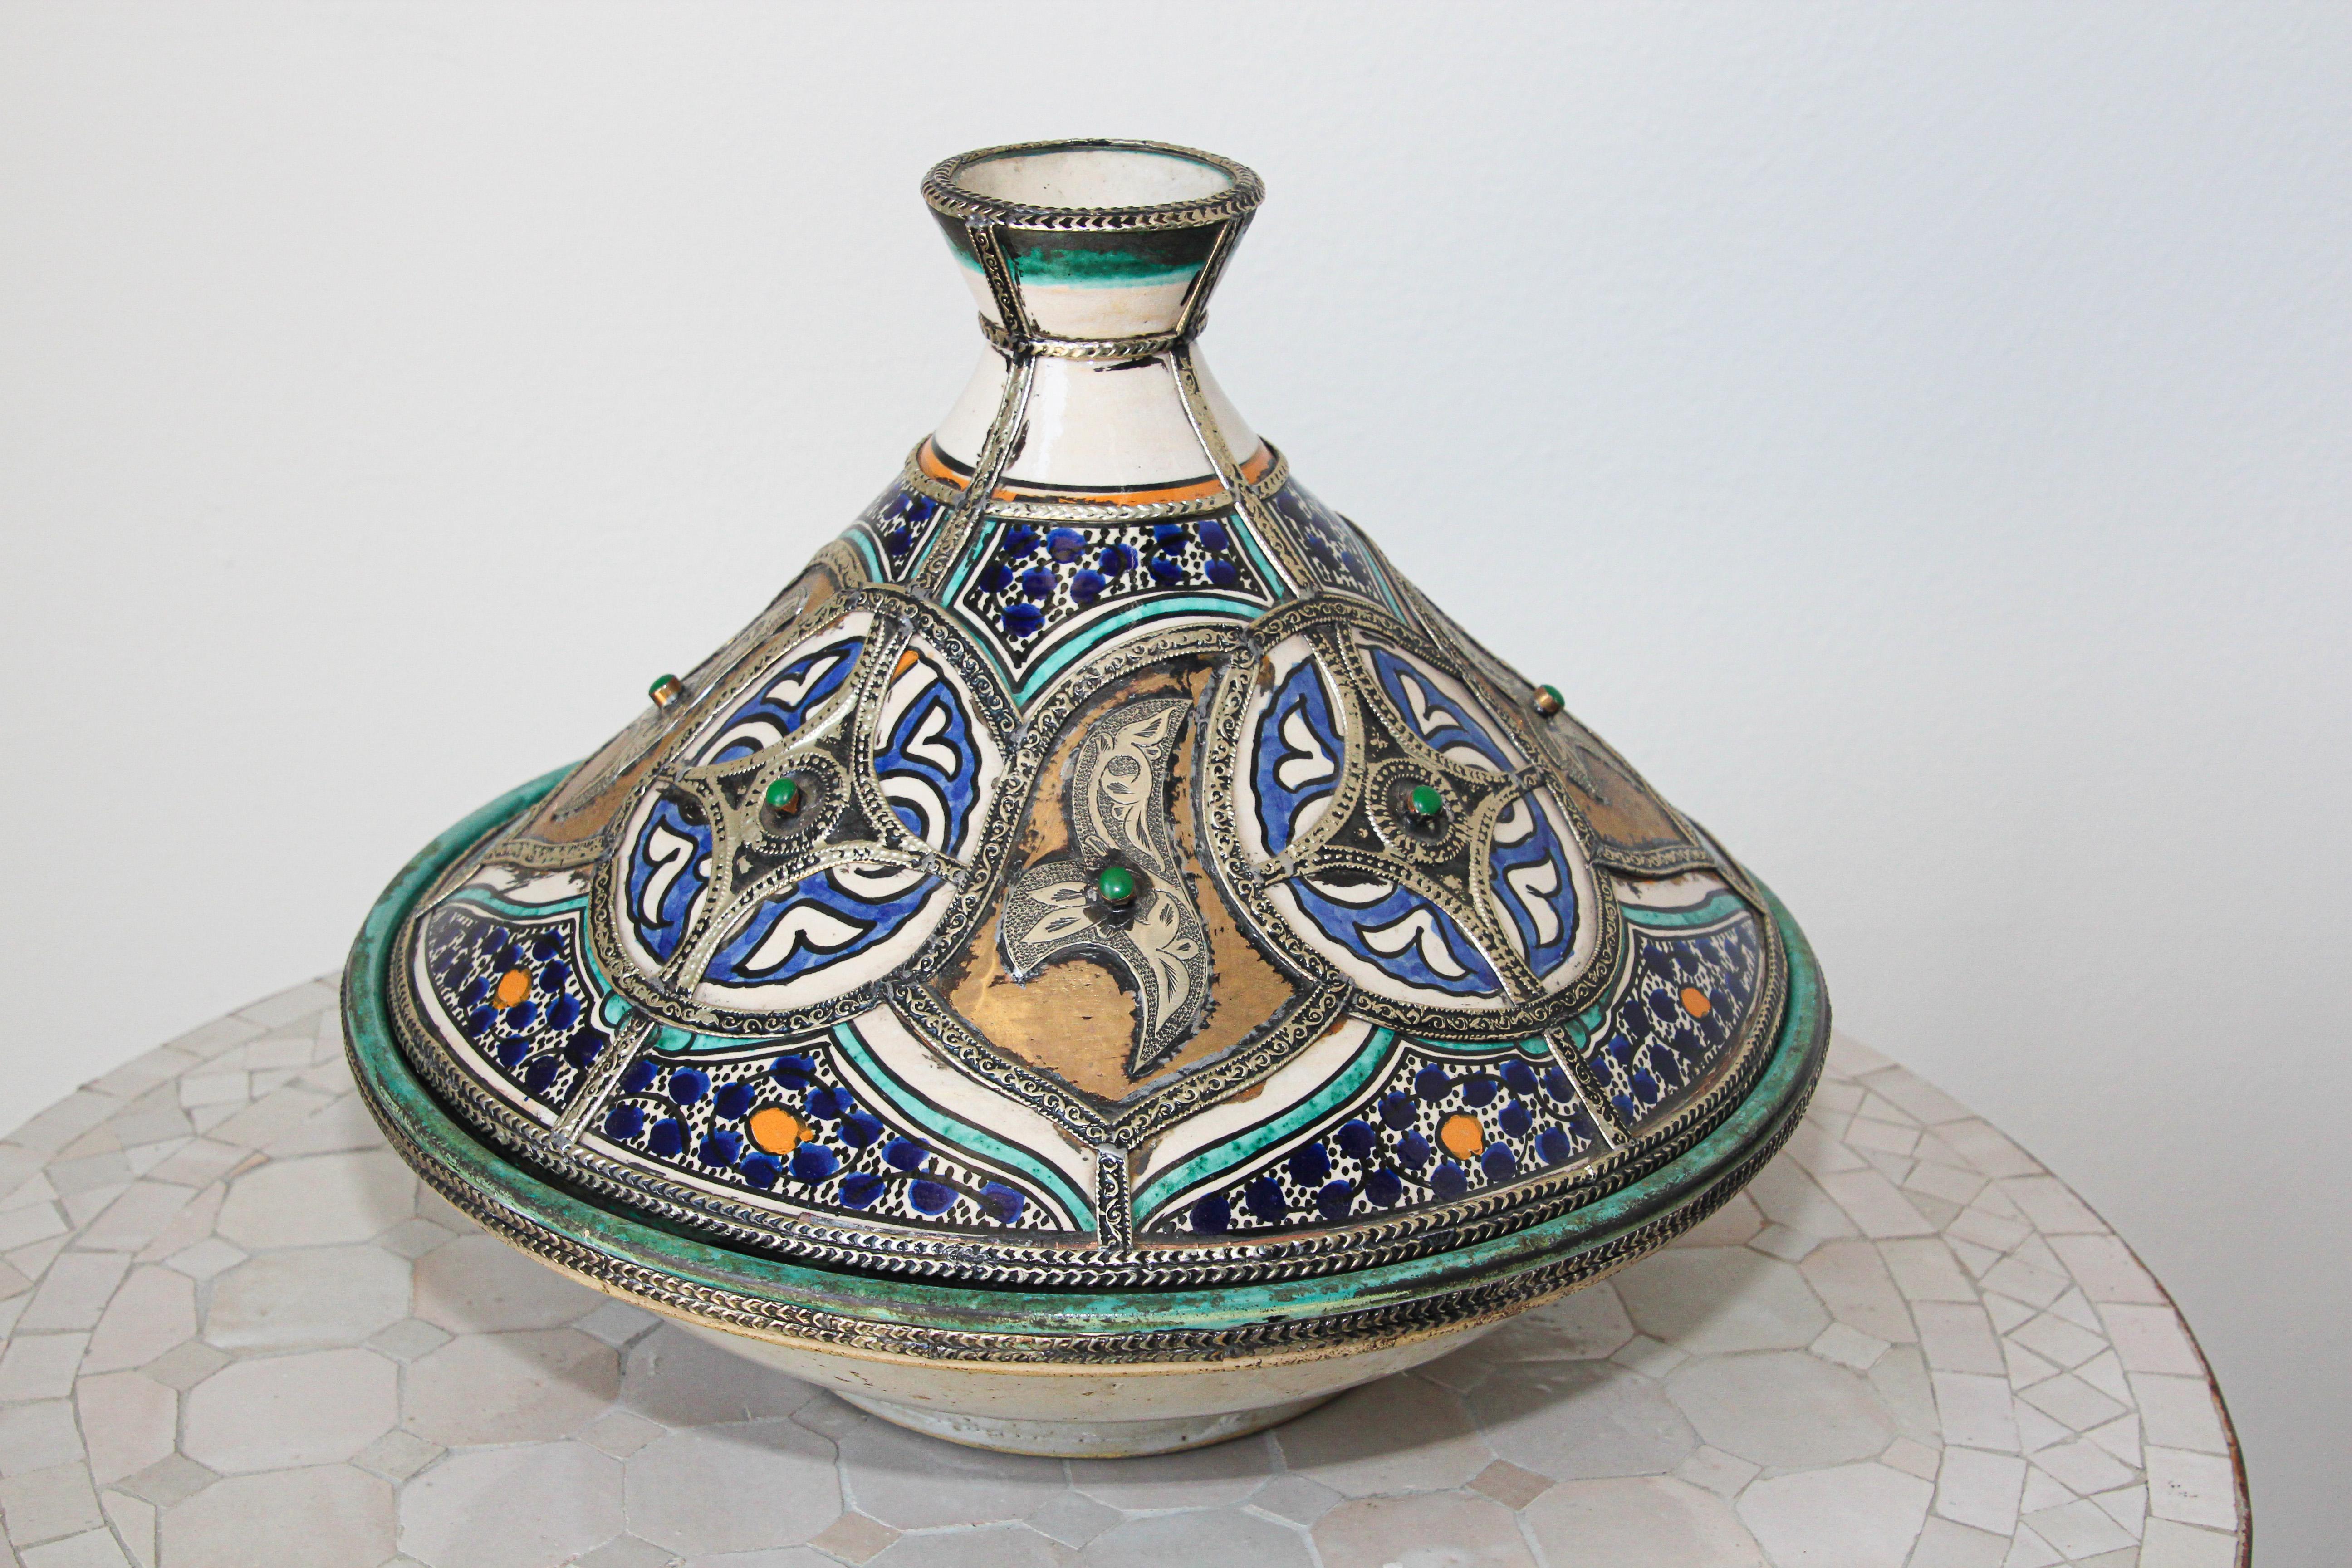 Moroccan large ceramic decorative serving bowl tajine polychrome with leather, stones and metal overlay with conical overlay lid.
The bottom is a circular ceramic bowl and the top of the tagine is distinctively shaped into a cone.
Handcrafted and